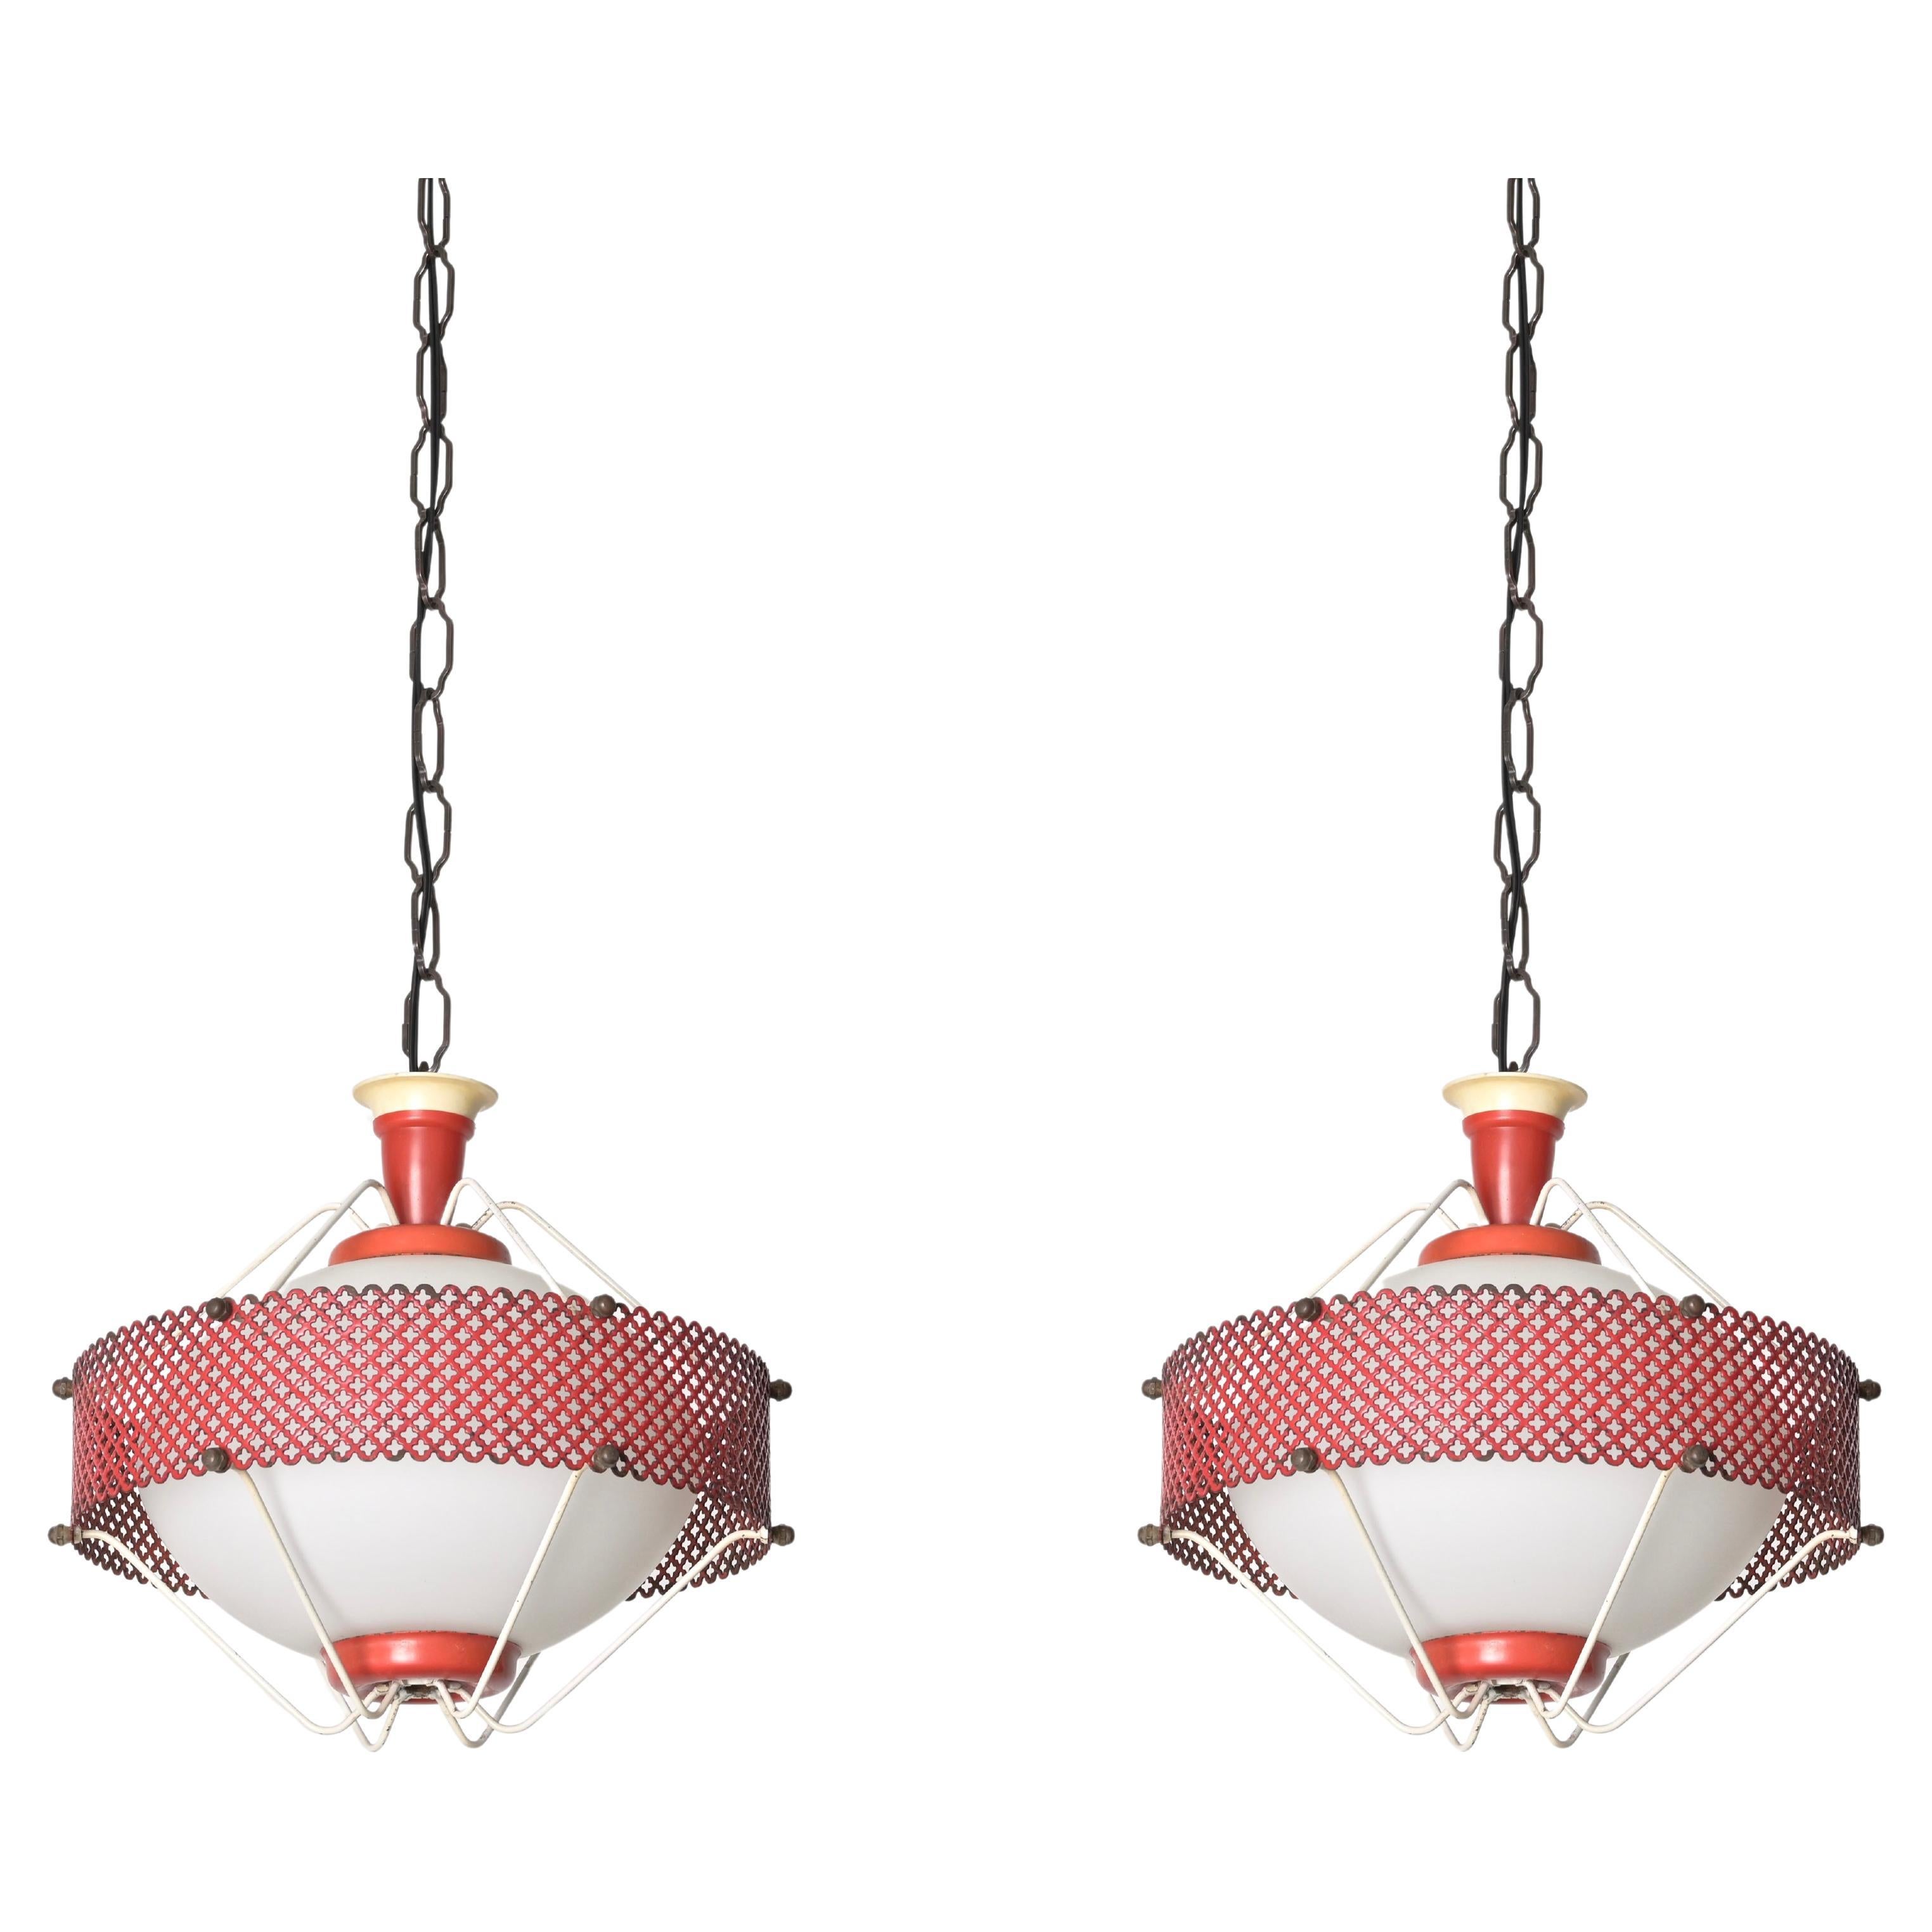 Mathieu Matégot Pendant Lamps in Opal Glass, Red Metal, 1950s French Lighting For Sale